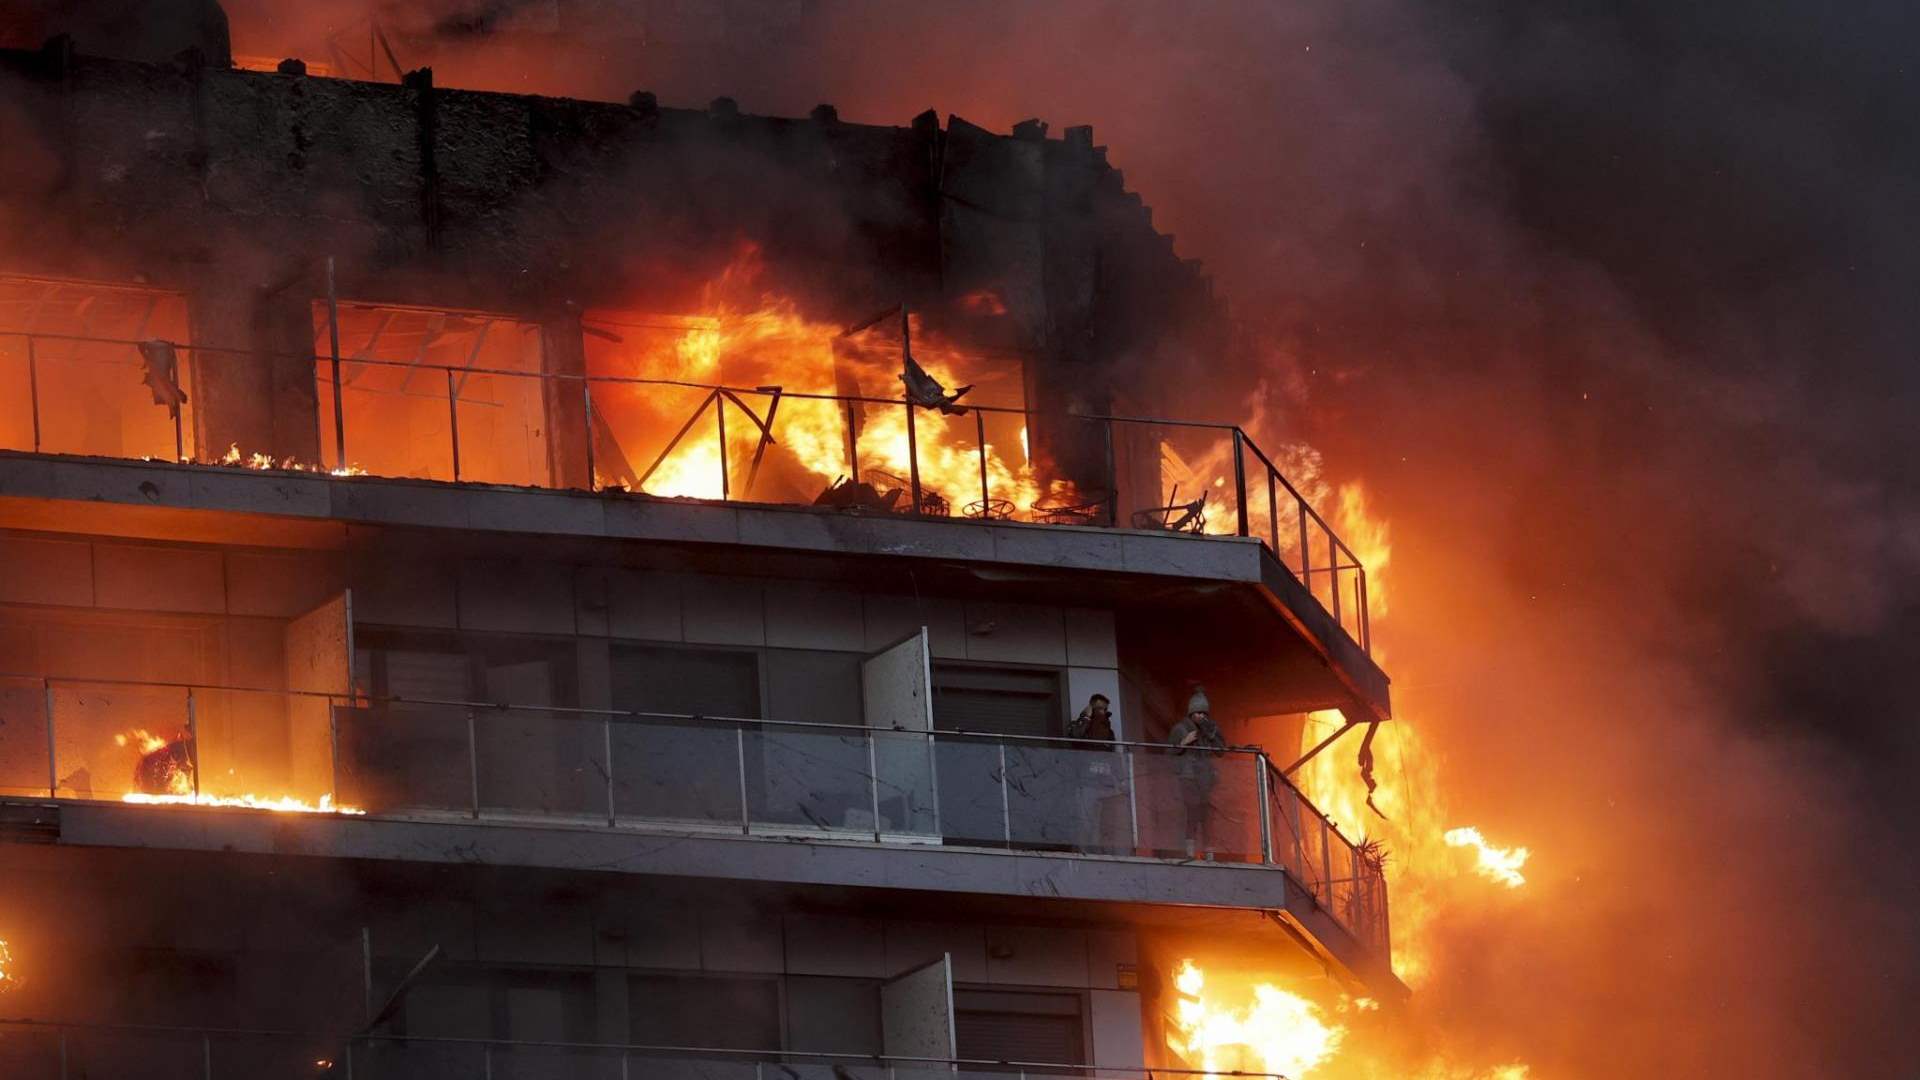 Four dead, up to 14 missing in Spain after fire erupted in apartment building